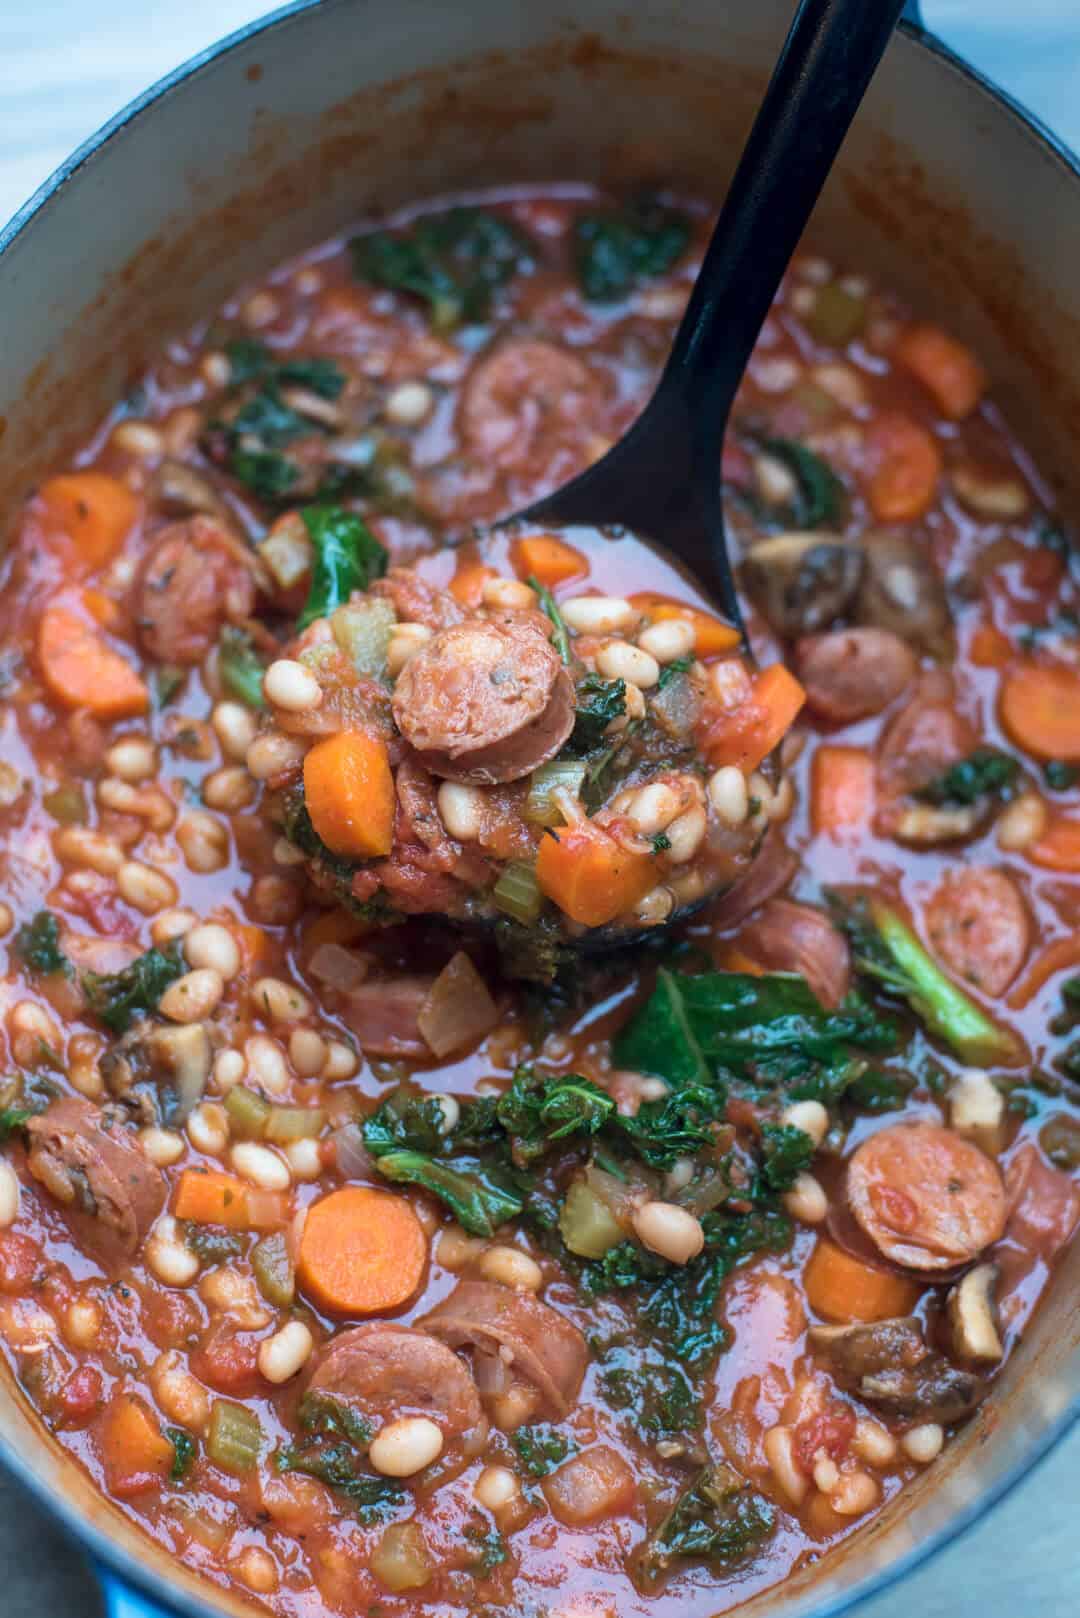 A ladle scoops Sausage White Bean and Kale Stew from a Dutch oven.